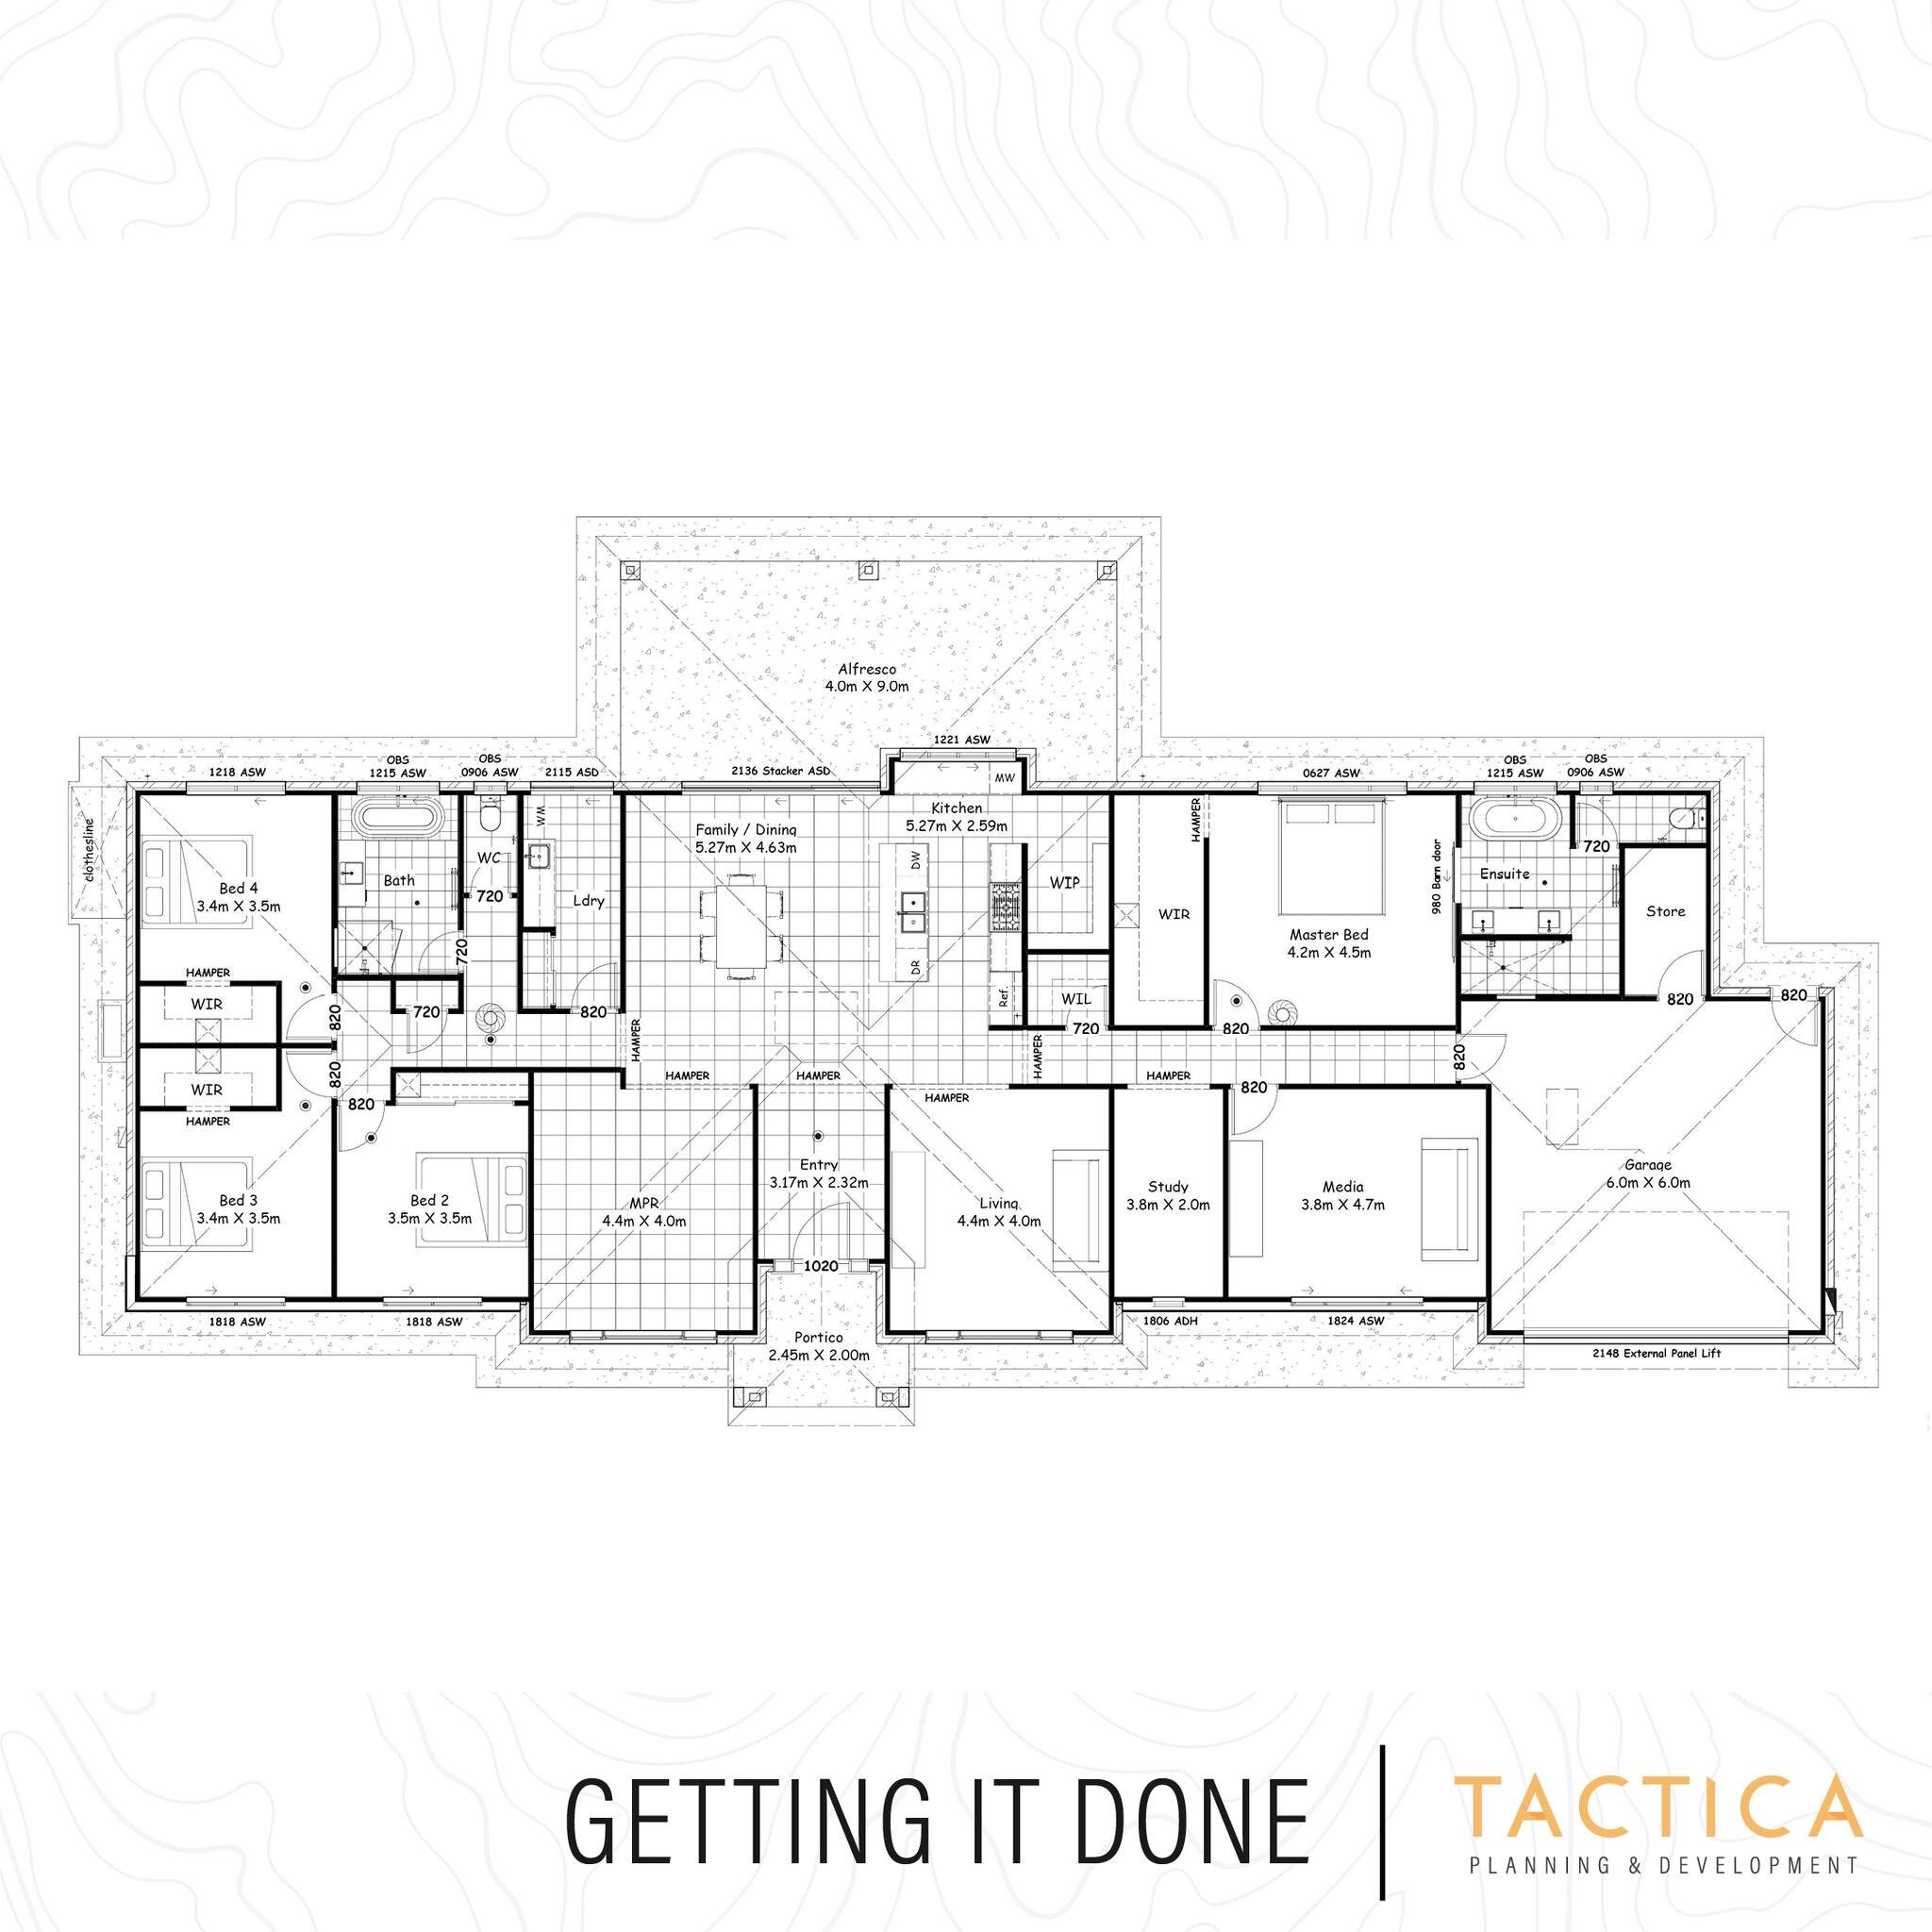 Here's a lovely win for home-based businesses everywhere. We love getting results for our clients. 
.
#homebasedbusiness #tacticaplan #planning #goldcoast #tacticaplanning&amp;development #townplanning #urbanplanning #development #goldcoastplanning #